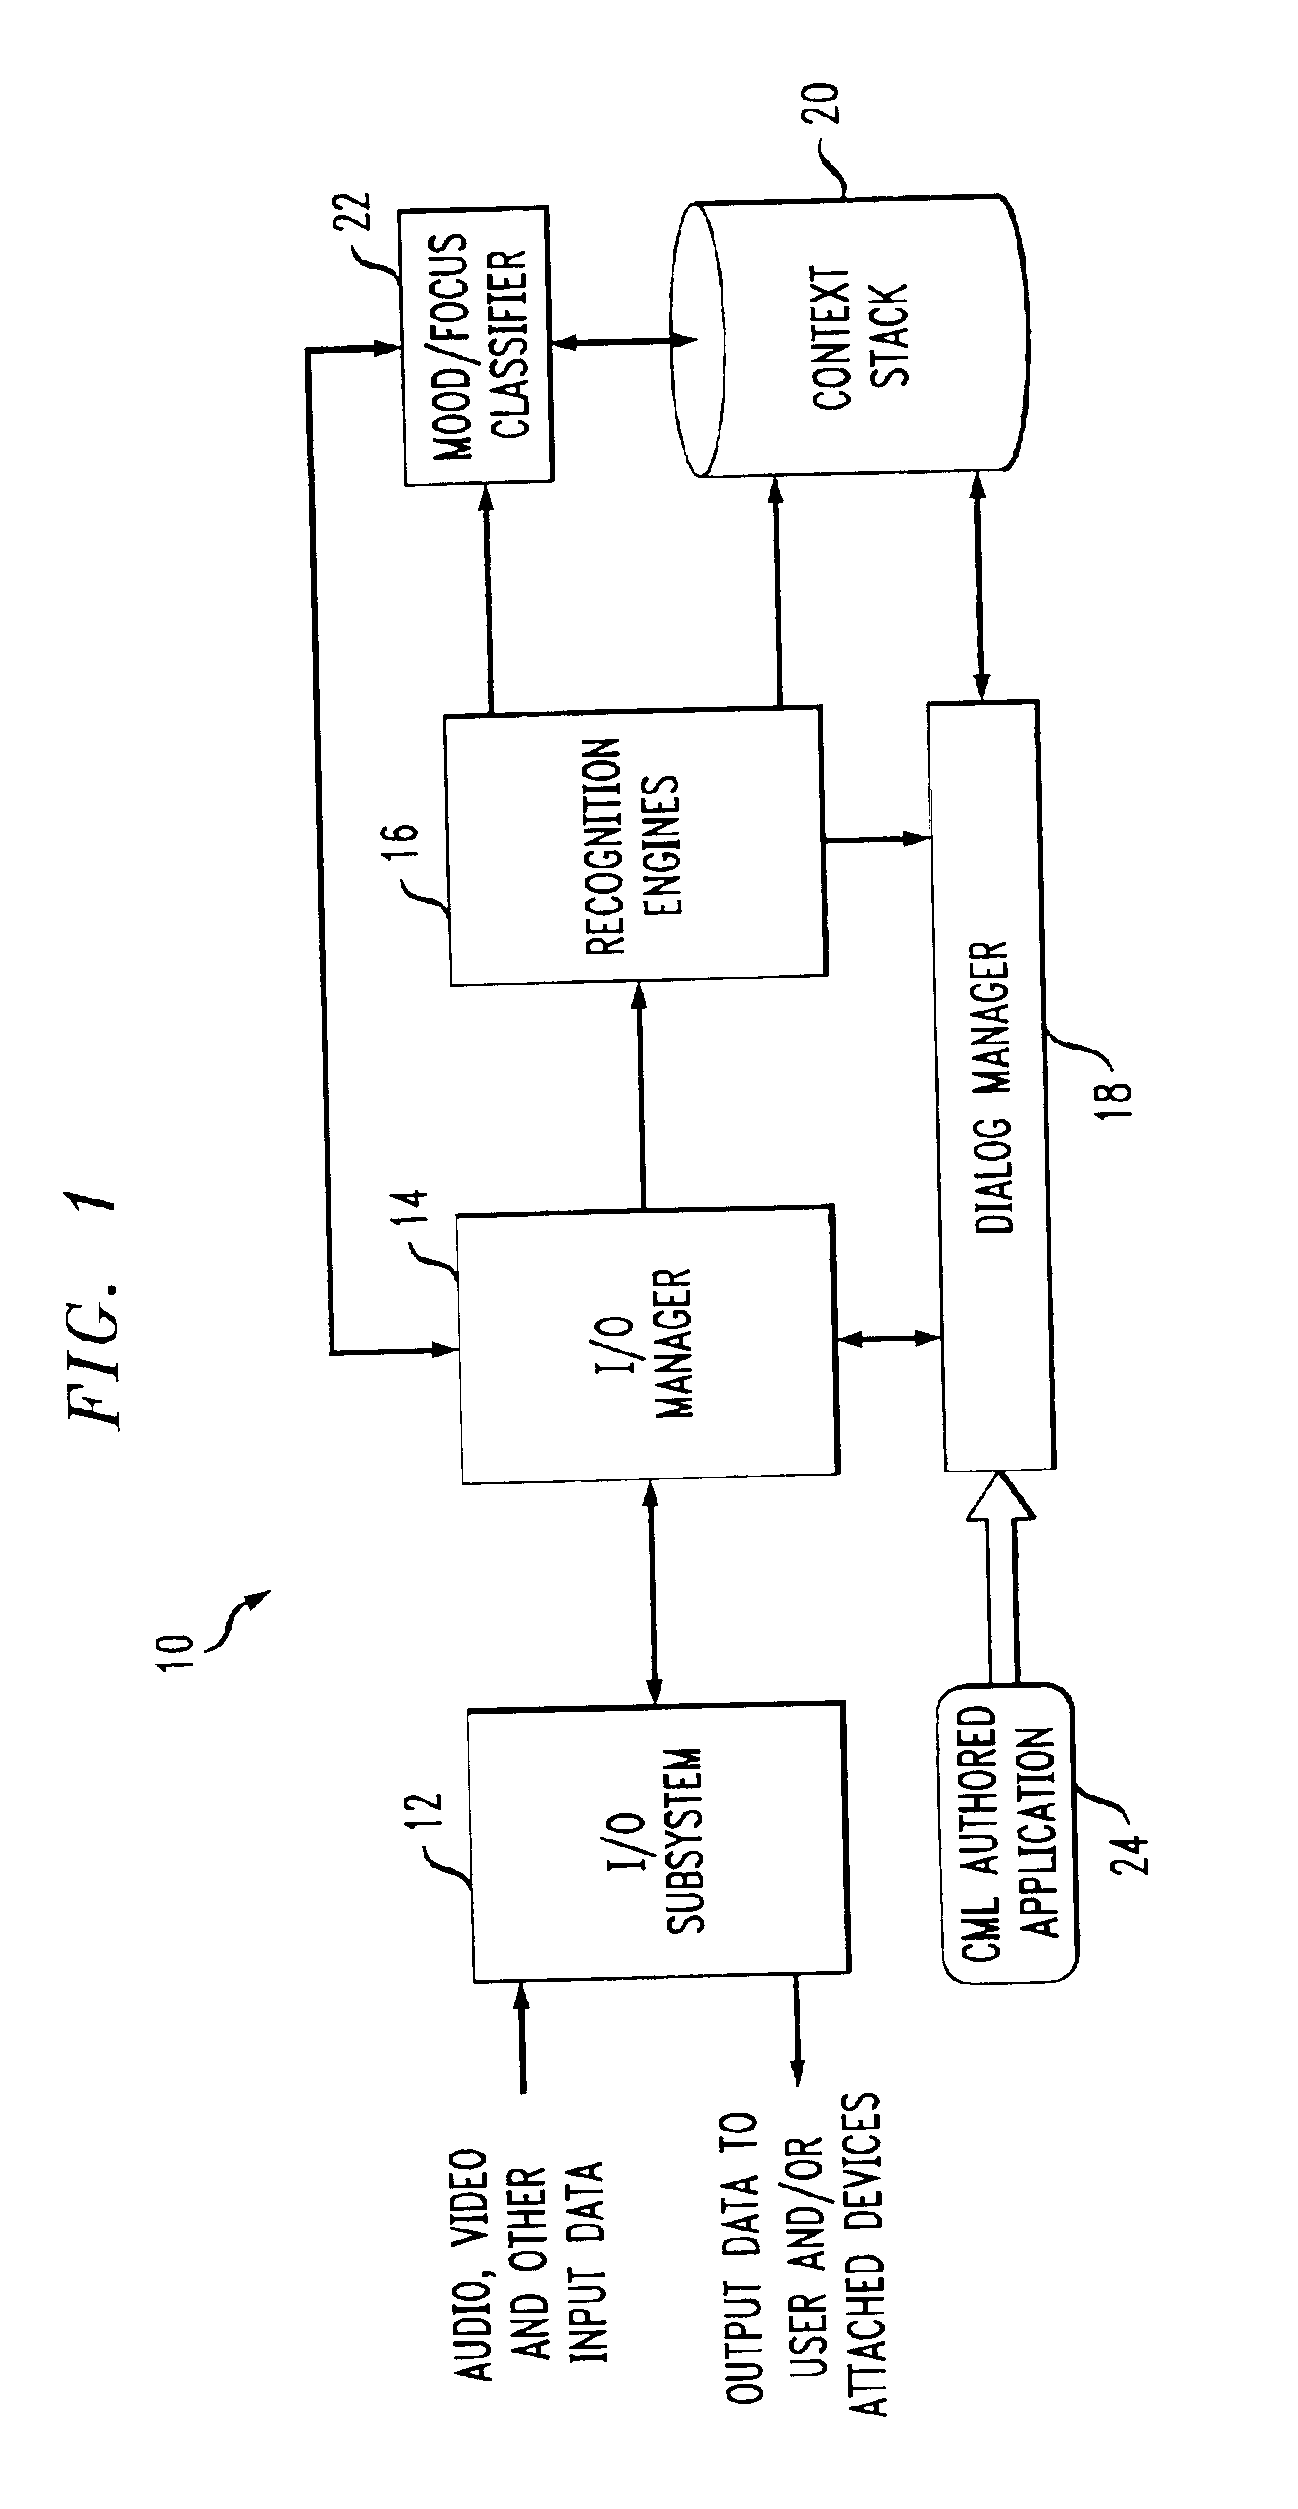 System and method for multi-modal focus detection, referential ambiguity resolution and mood classification using multi-modal input